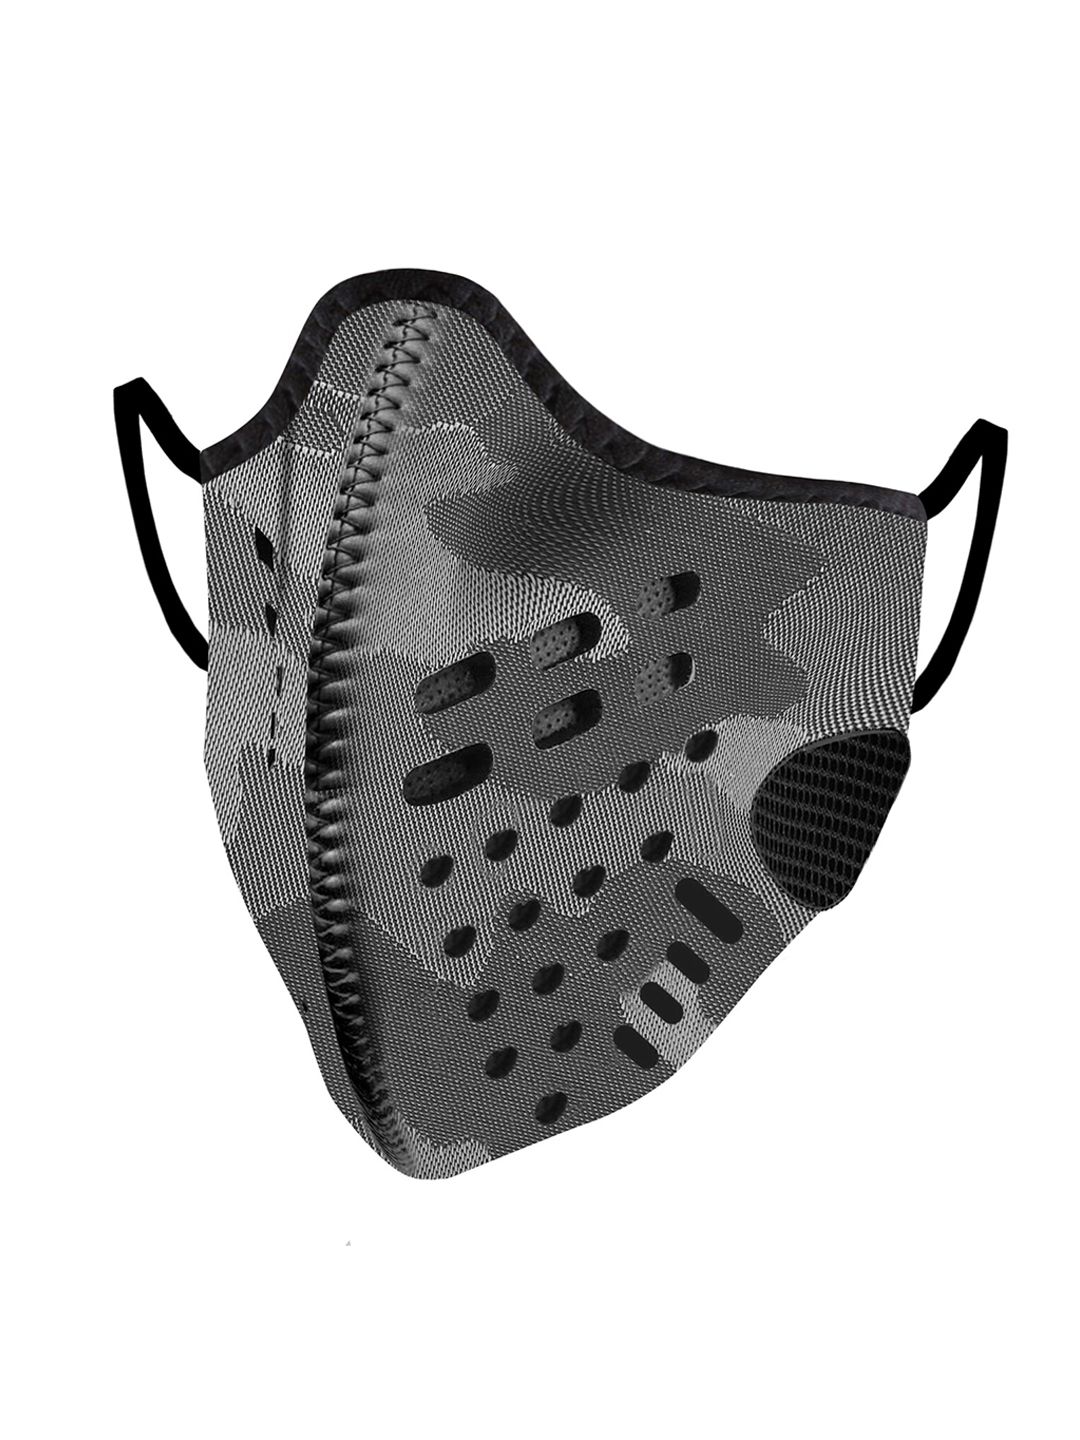 Lioncrown Charcoal Grey & Black Camouflage Printed 6-Ply Cloth Mask Price in India